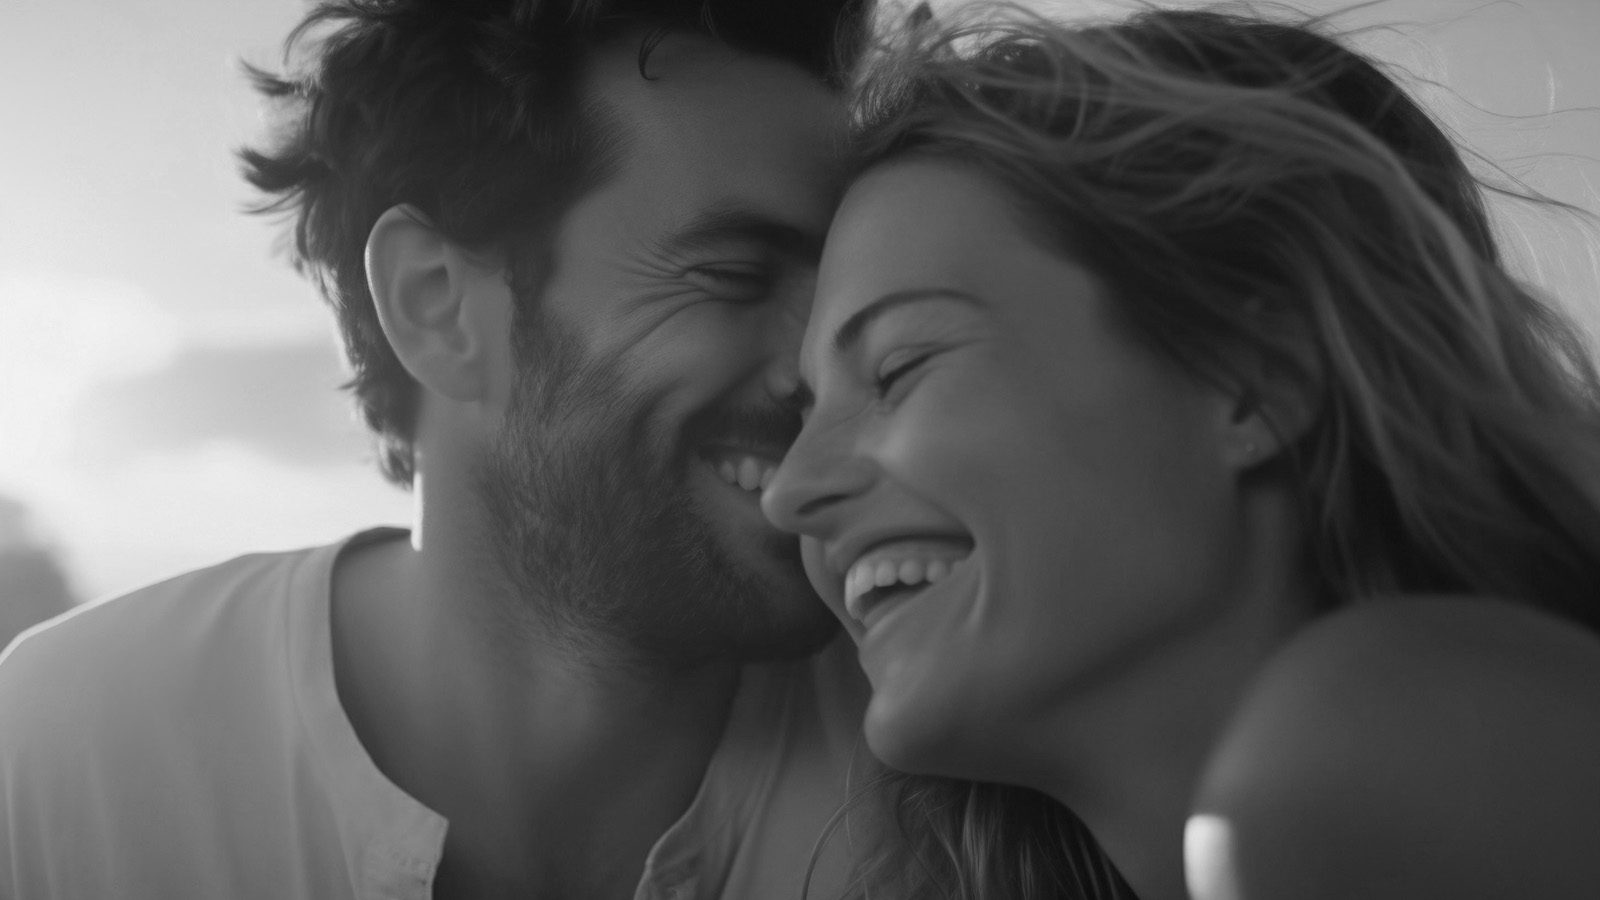 10 Signs of Partners With Unconditional Love